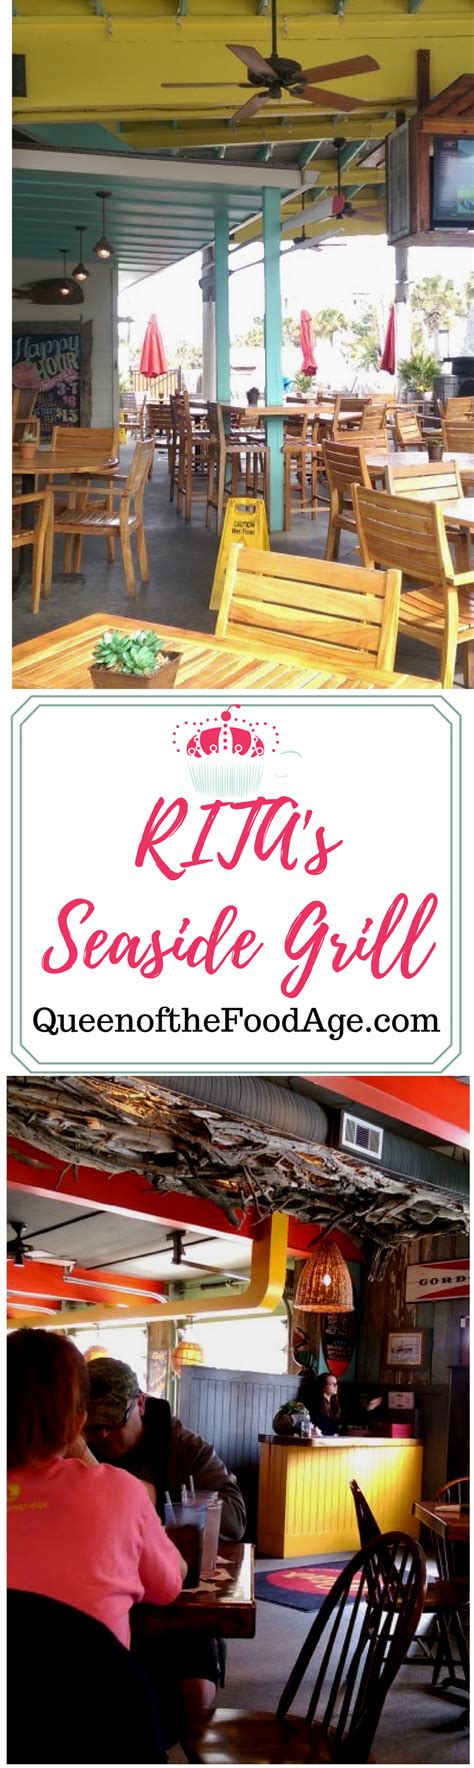 Review Of Ritas Seaside Grill On Folly Beach Sc By Queen Of The Food